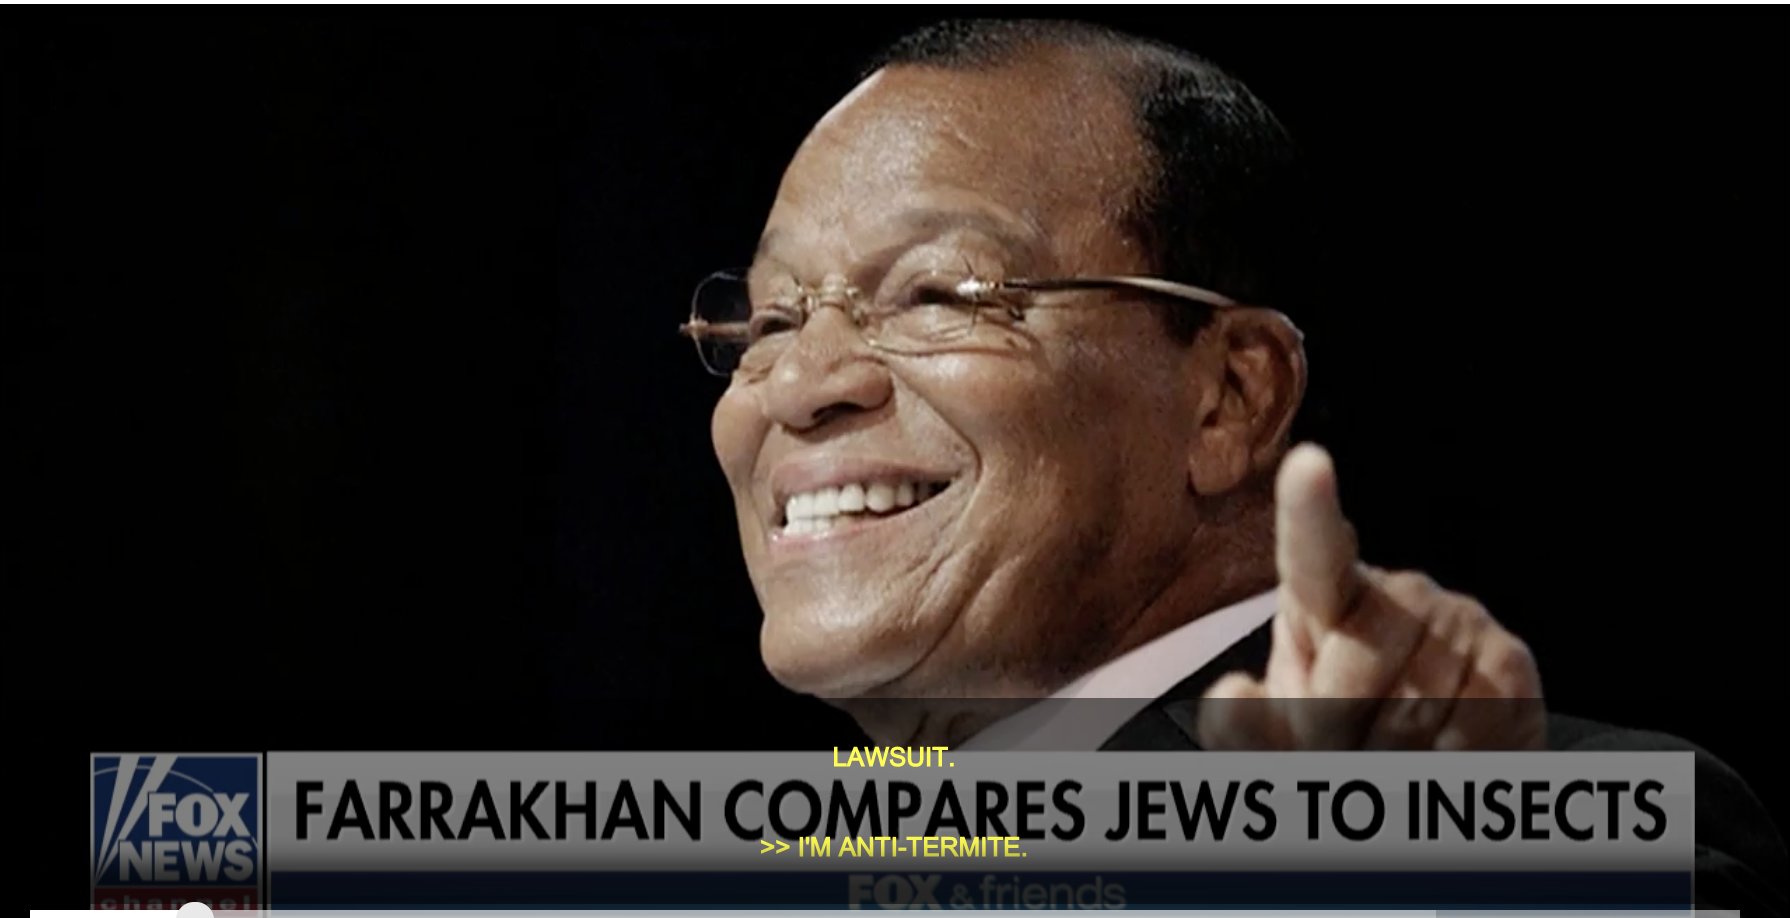 Louis Farrakhan, Nation of Islam leader, leads ‘Death to America’ chant in Iran